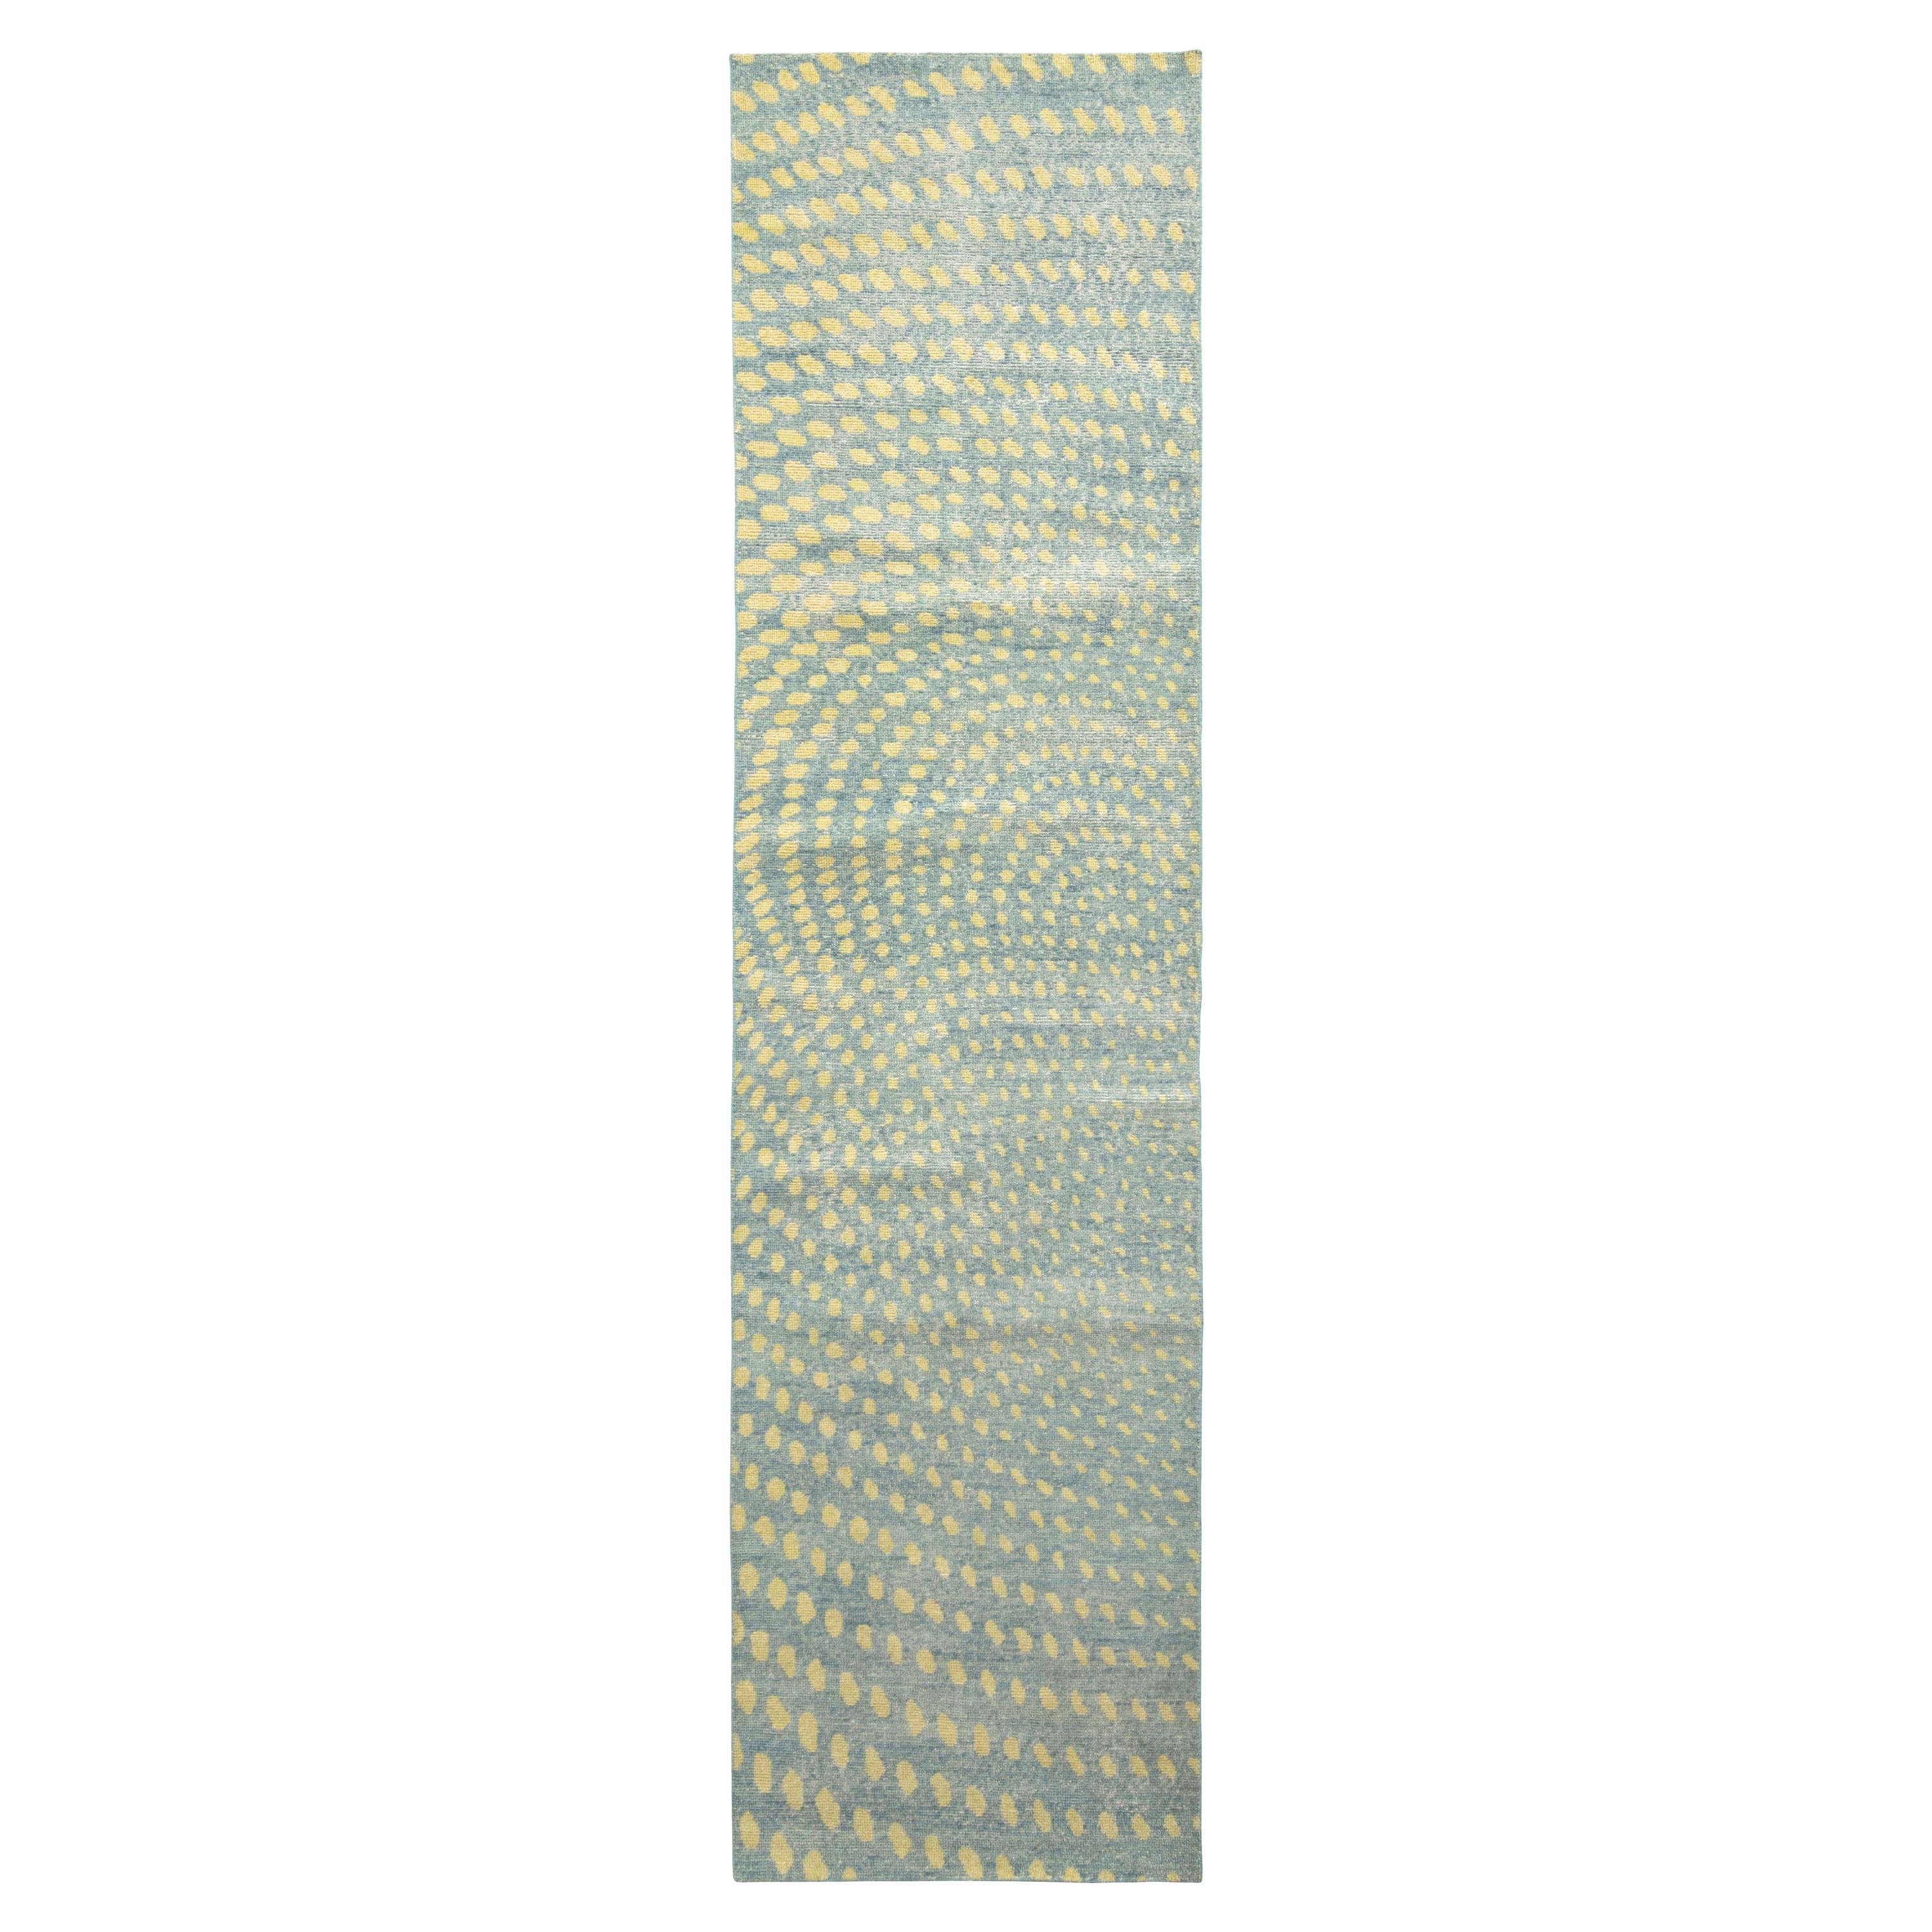 Rug & Kilim’s Distressed Style Runner in Blue, Yellow Geometric Pattern For Sale